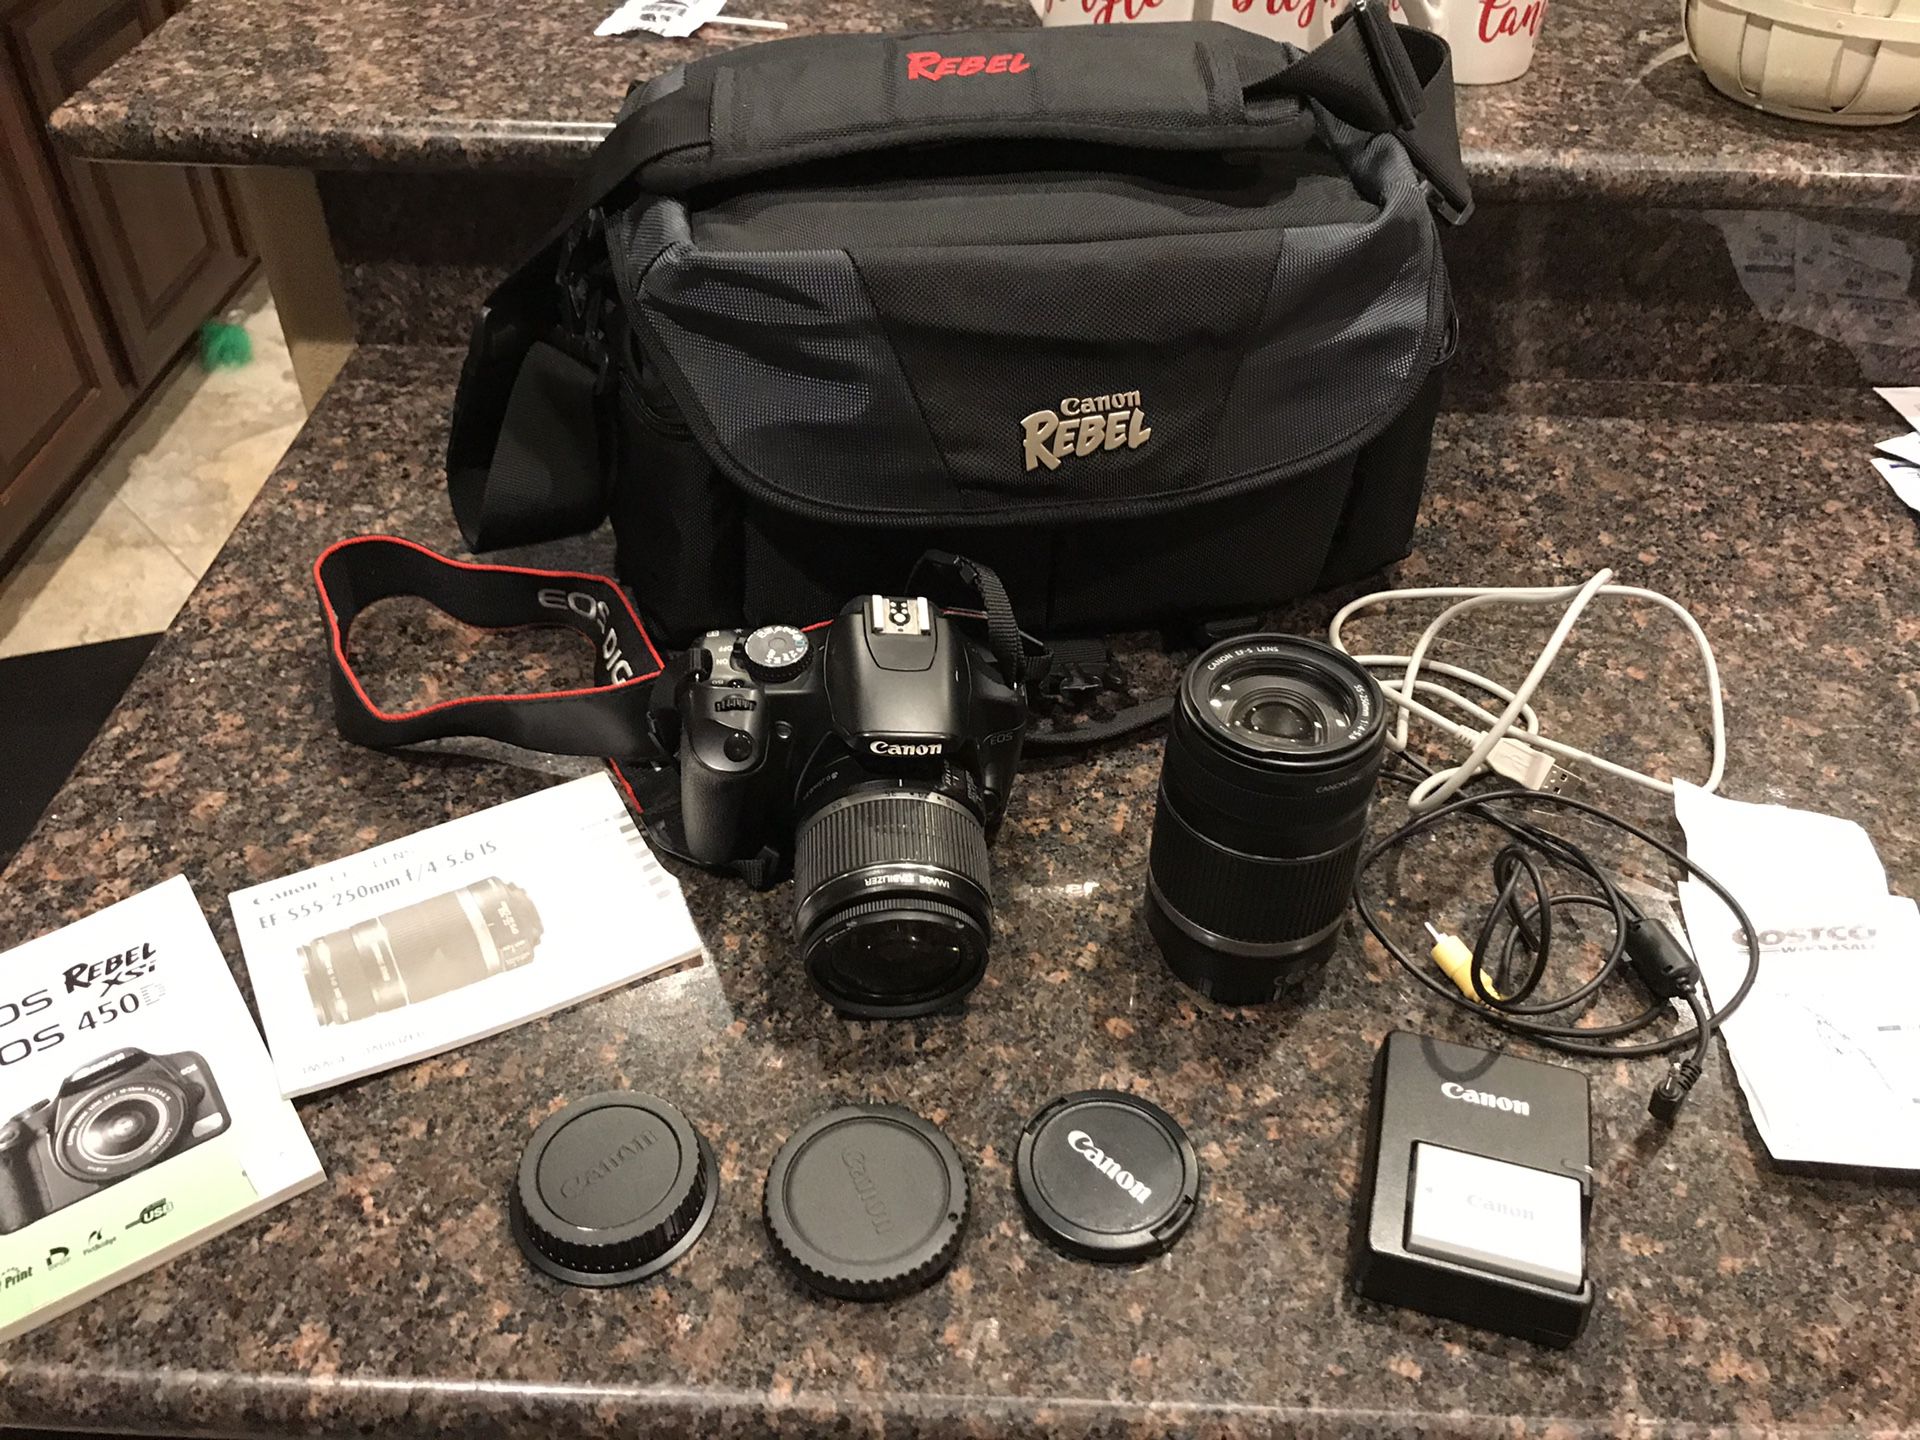 Canon EOS rebel XSI with additional lense